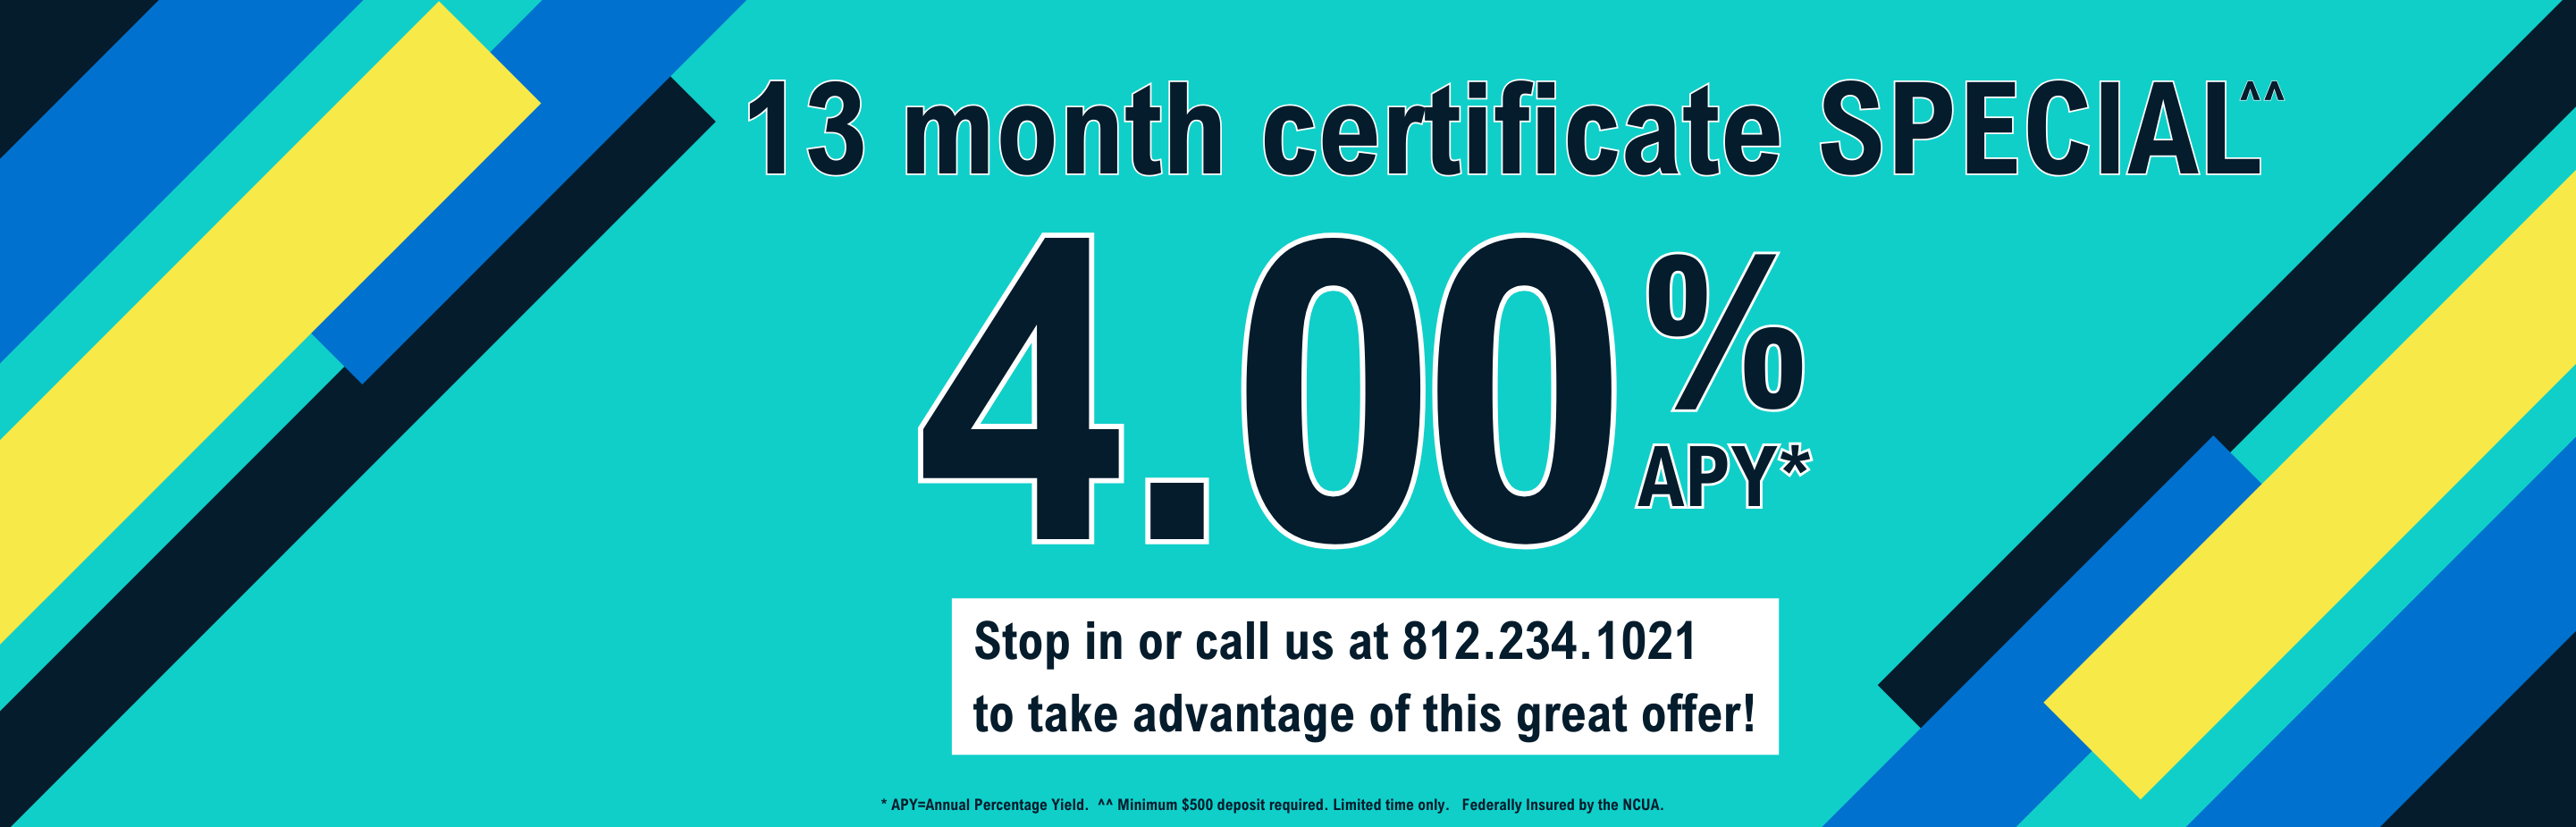 13 month certificate for 4.00%